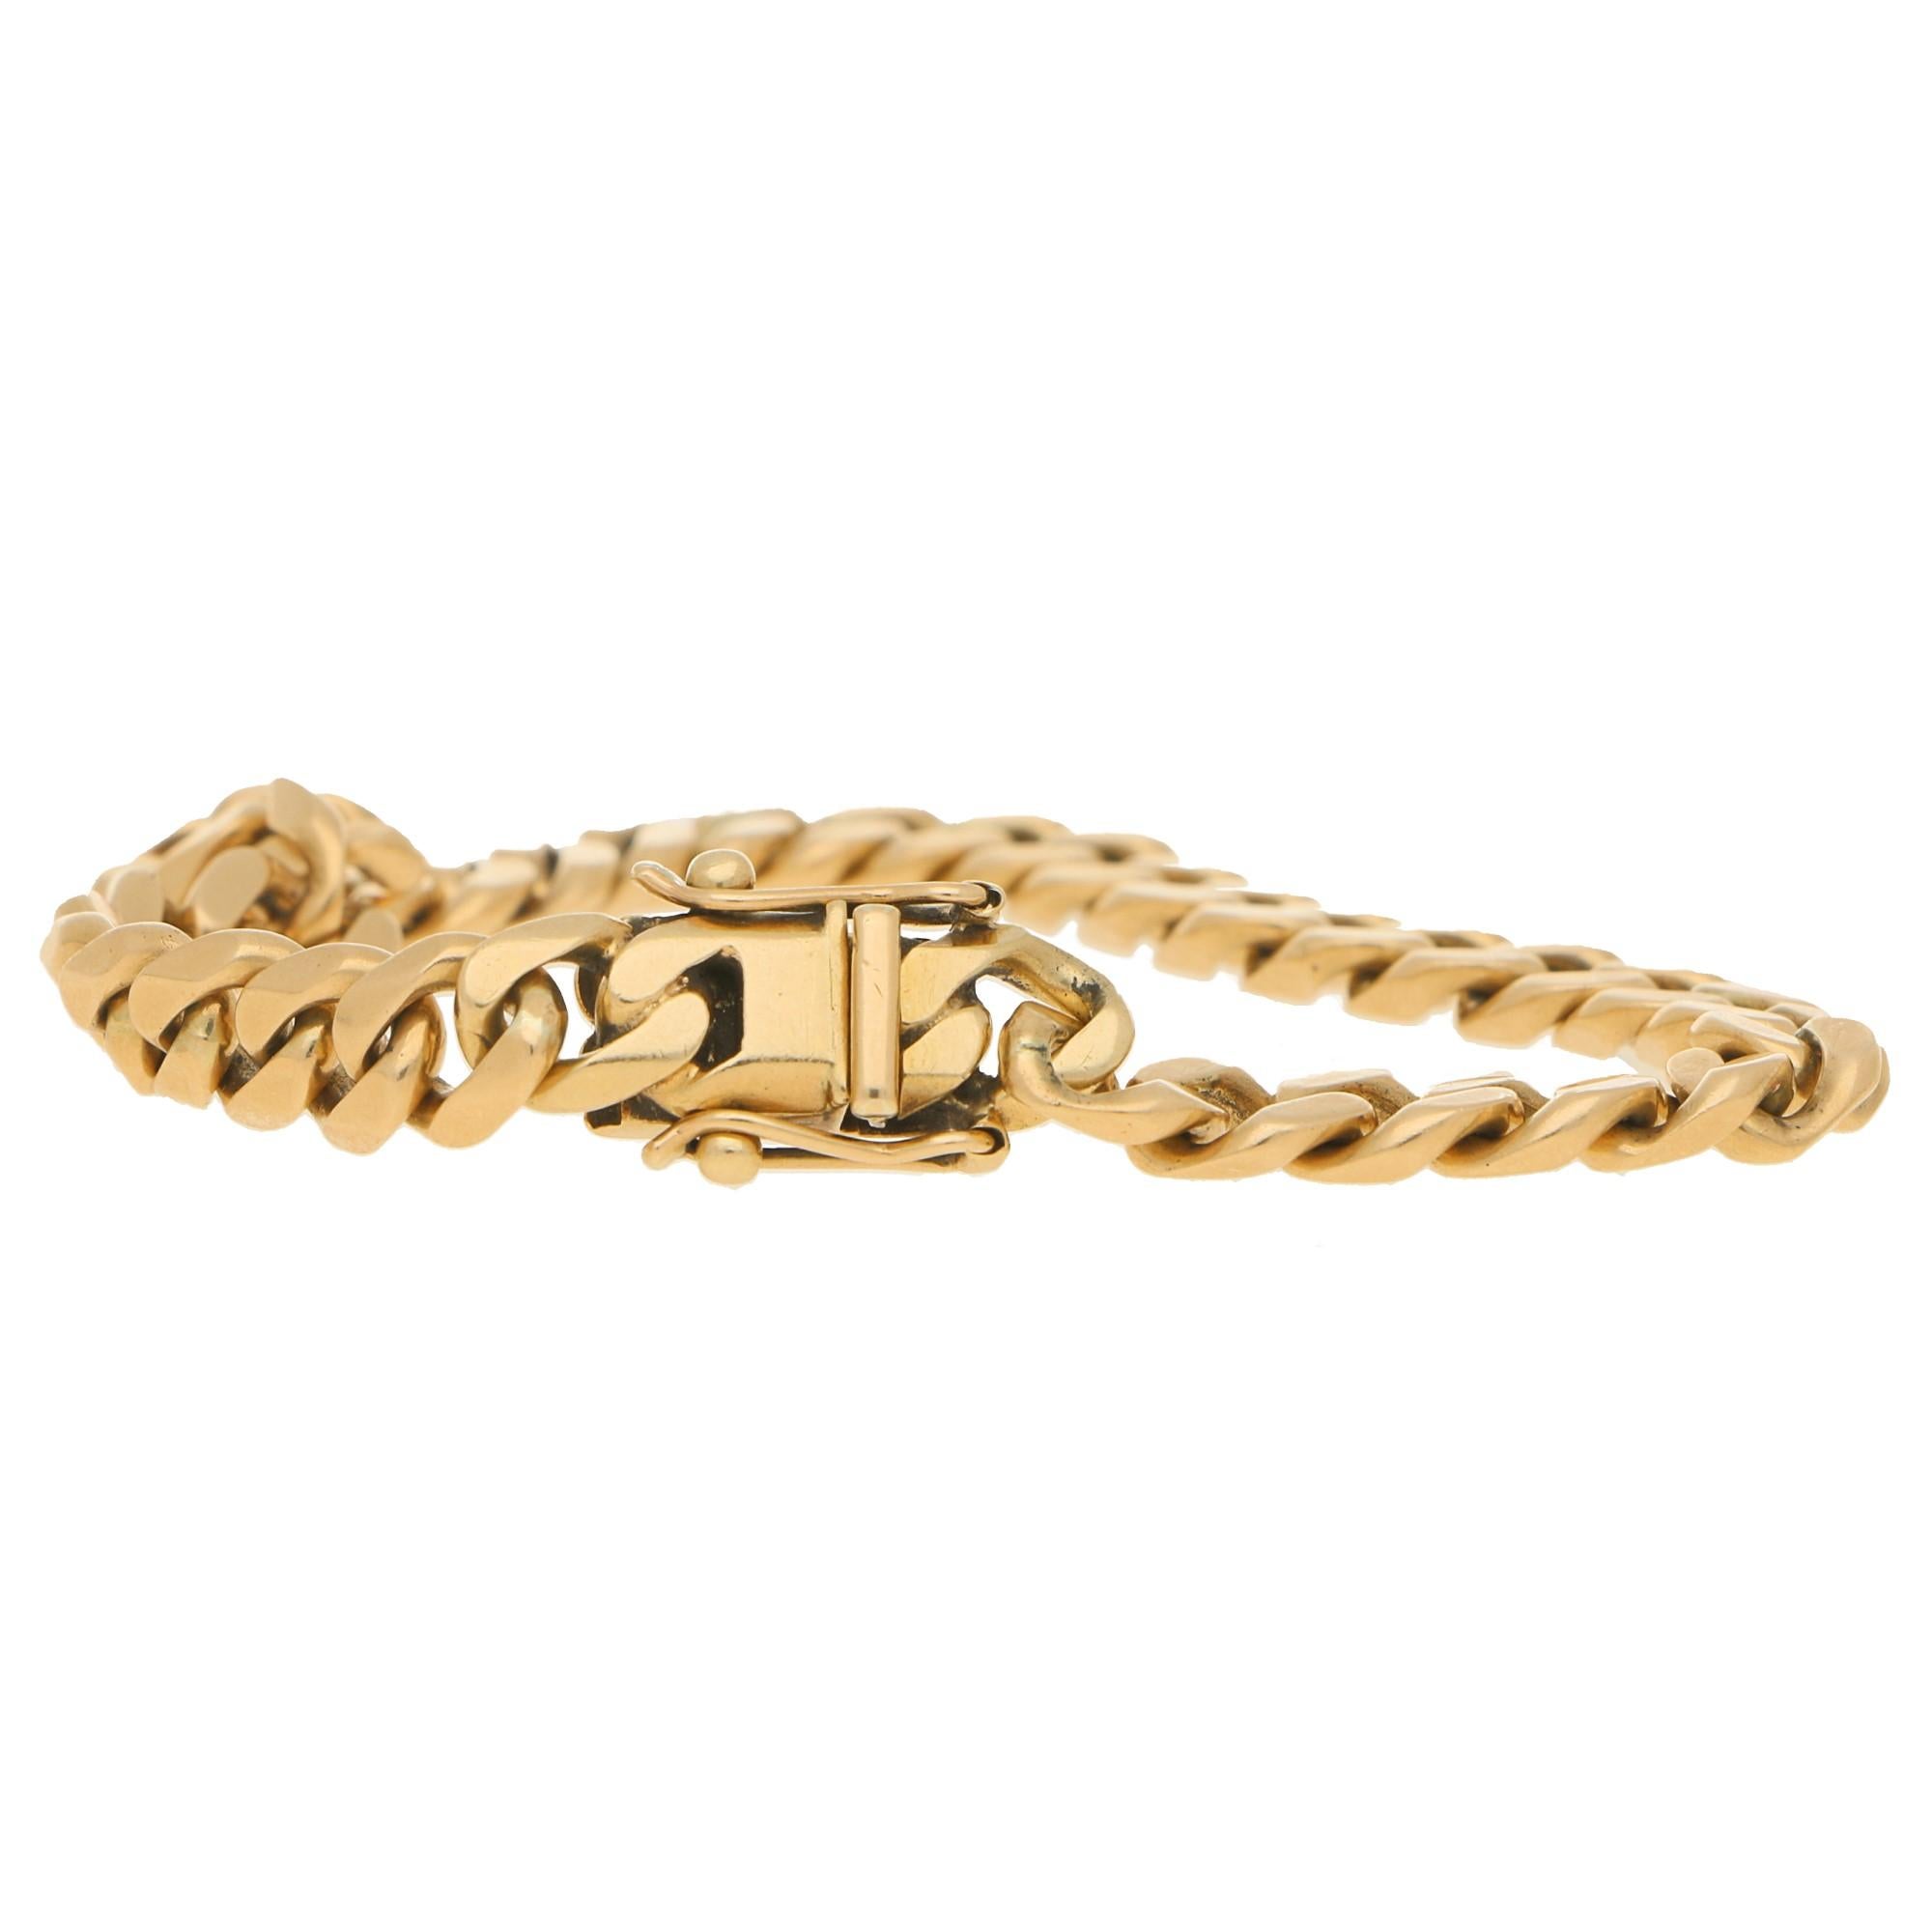 A vintage cuban-link chain bracelet in 9 carat yellow gold, doubly secured with a click-shut clasp and a safety catch fitting. 
Hallmarked in Birmingham, date letter T for 1993.
Dimensions: 20.5cm in length, 0.8cm width. Gross weight: 28.10g.
Miami